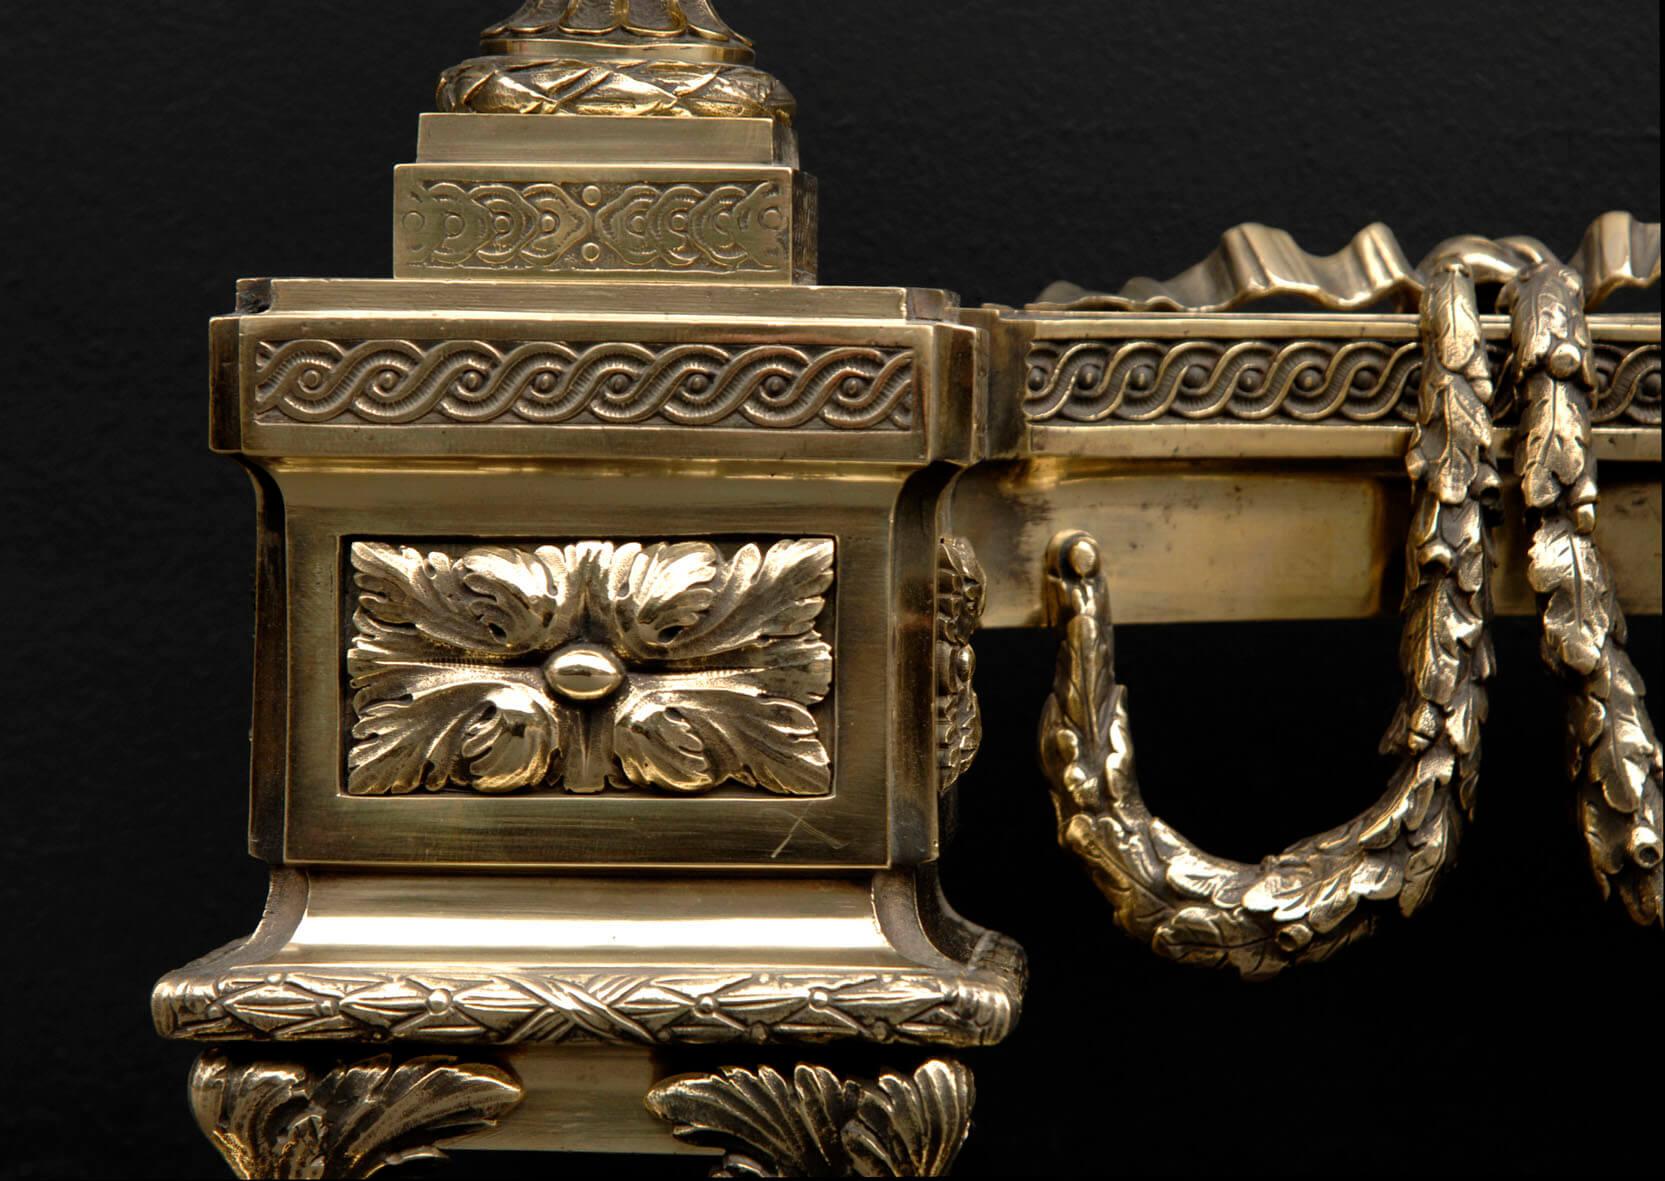 Pair of the finest quality early 19th century Louis XVI brass chenets. The base with lions feet and moulded relief design. Three acanthus leaf paterae with guilloche moulding. Impressive urns with swags and fluted stems, cherubs to sides, and